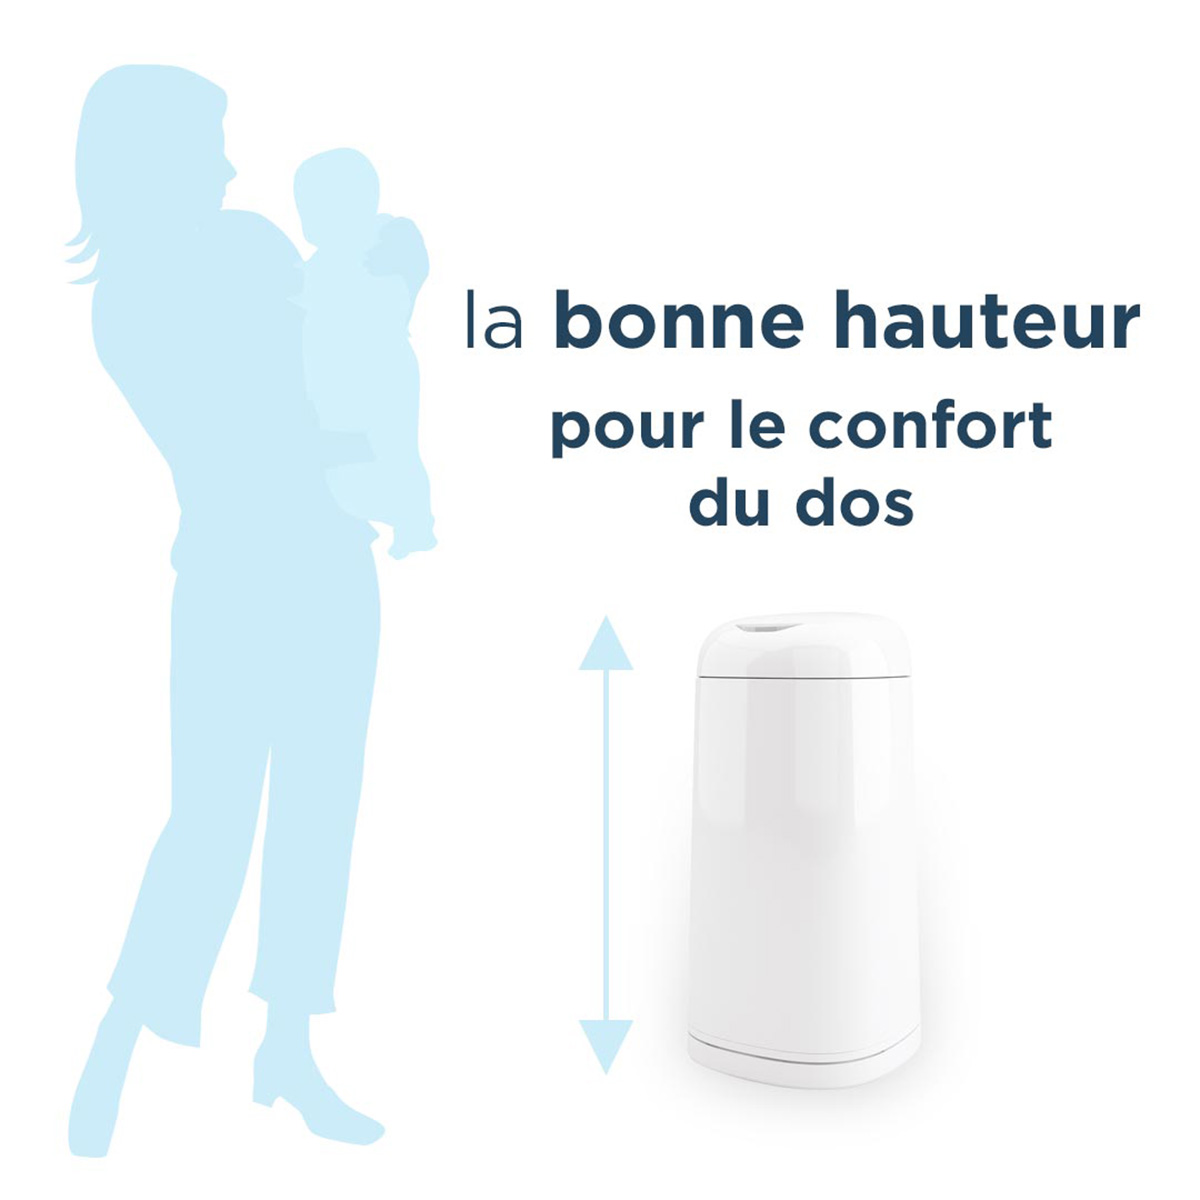 Recharge Couches Angelcare pas cher - Achat neuf et occasion